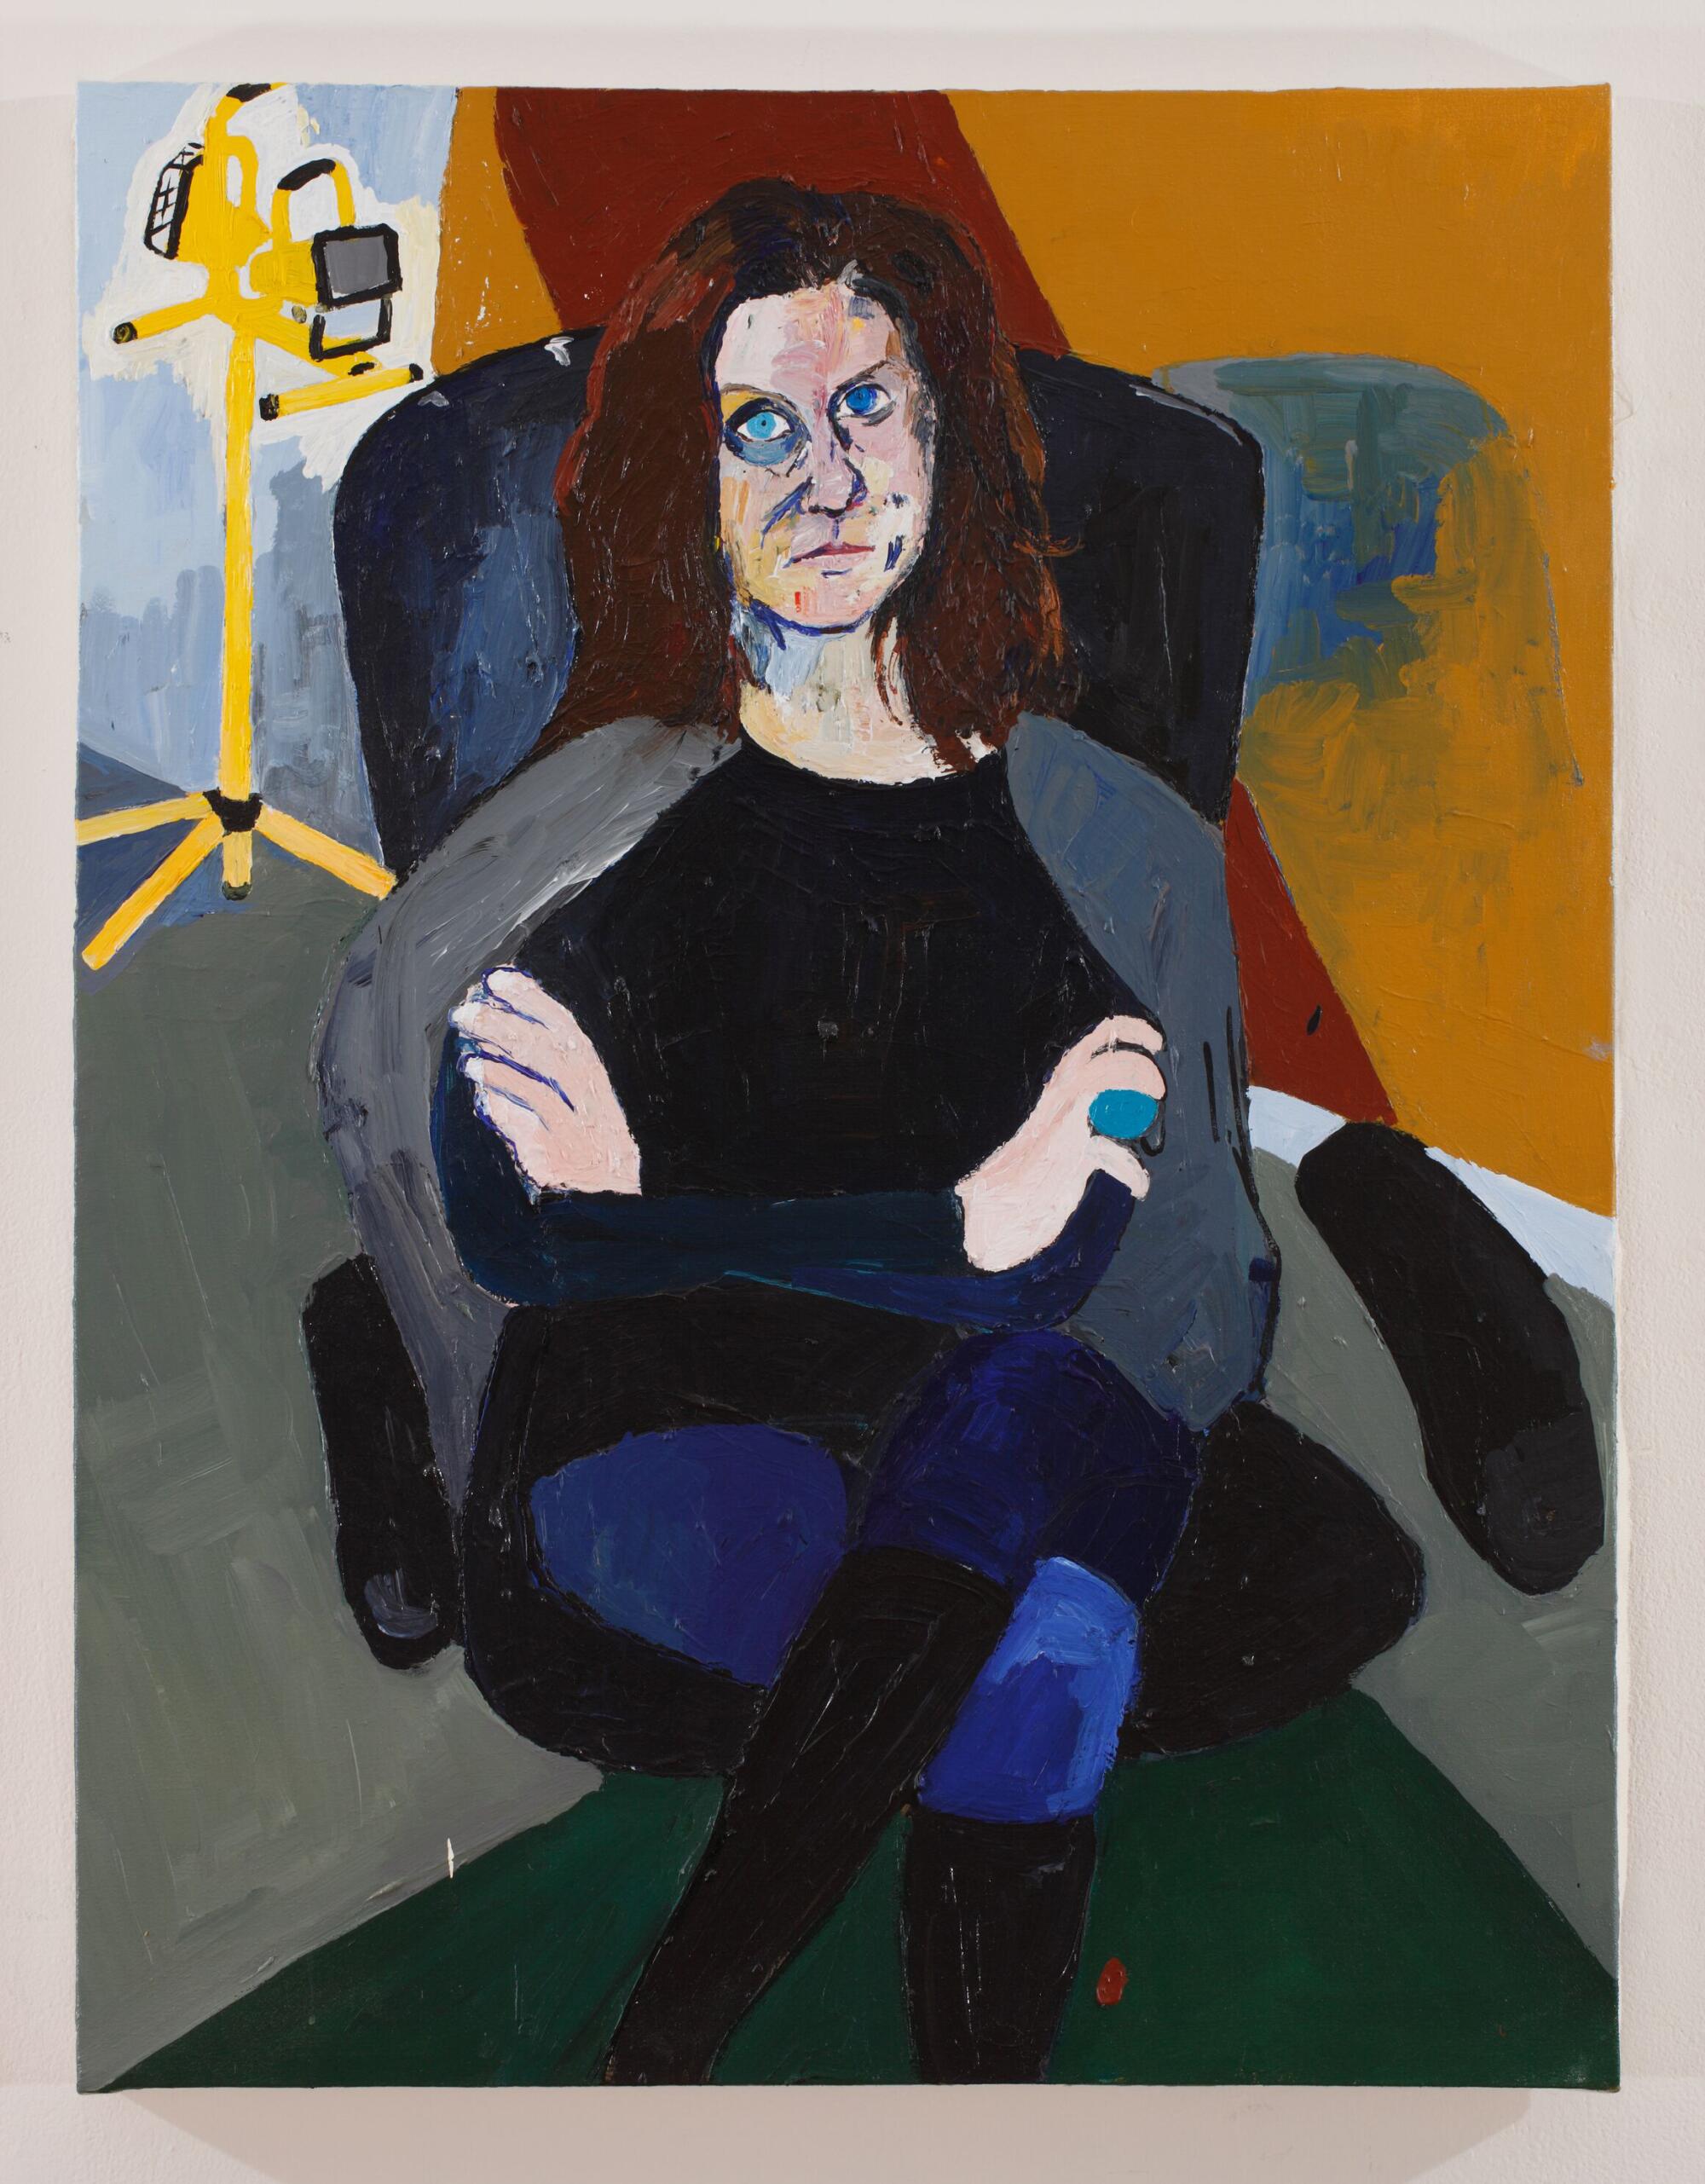 A vertical portrait by Henry Taylor shows artist Andrea Bowers sitting in a chair with her arms crossed.